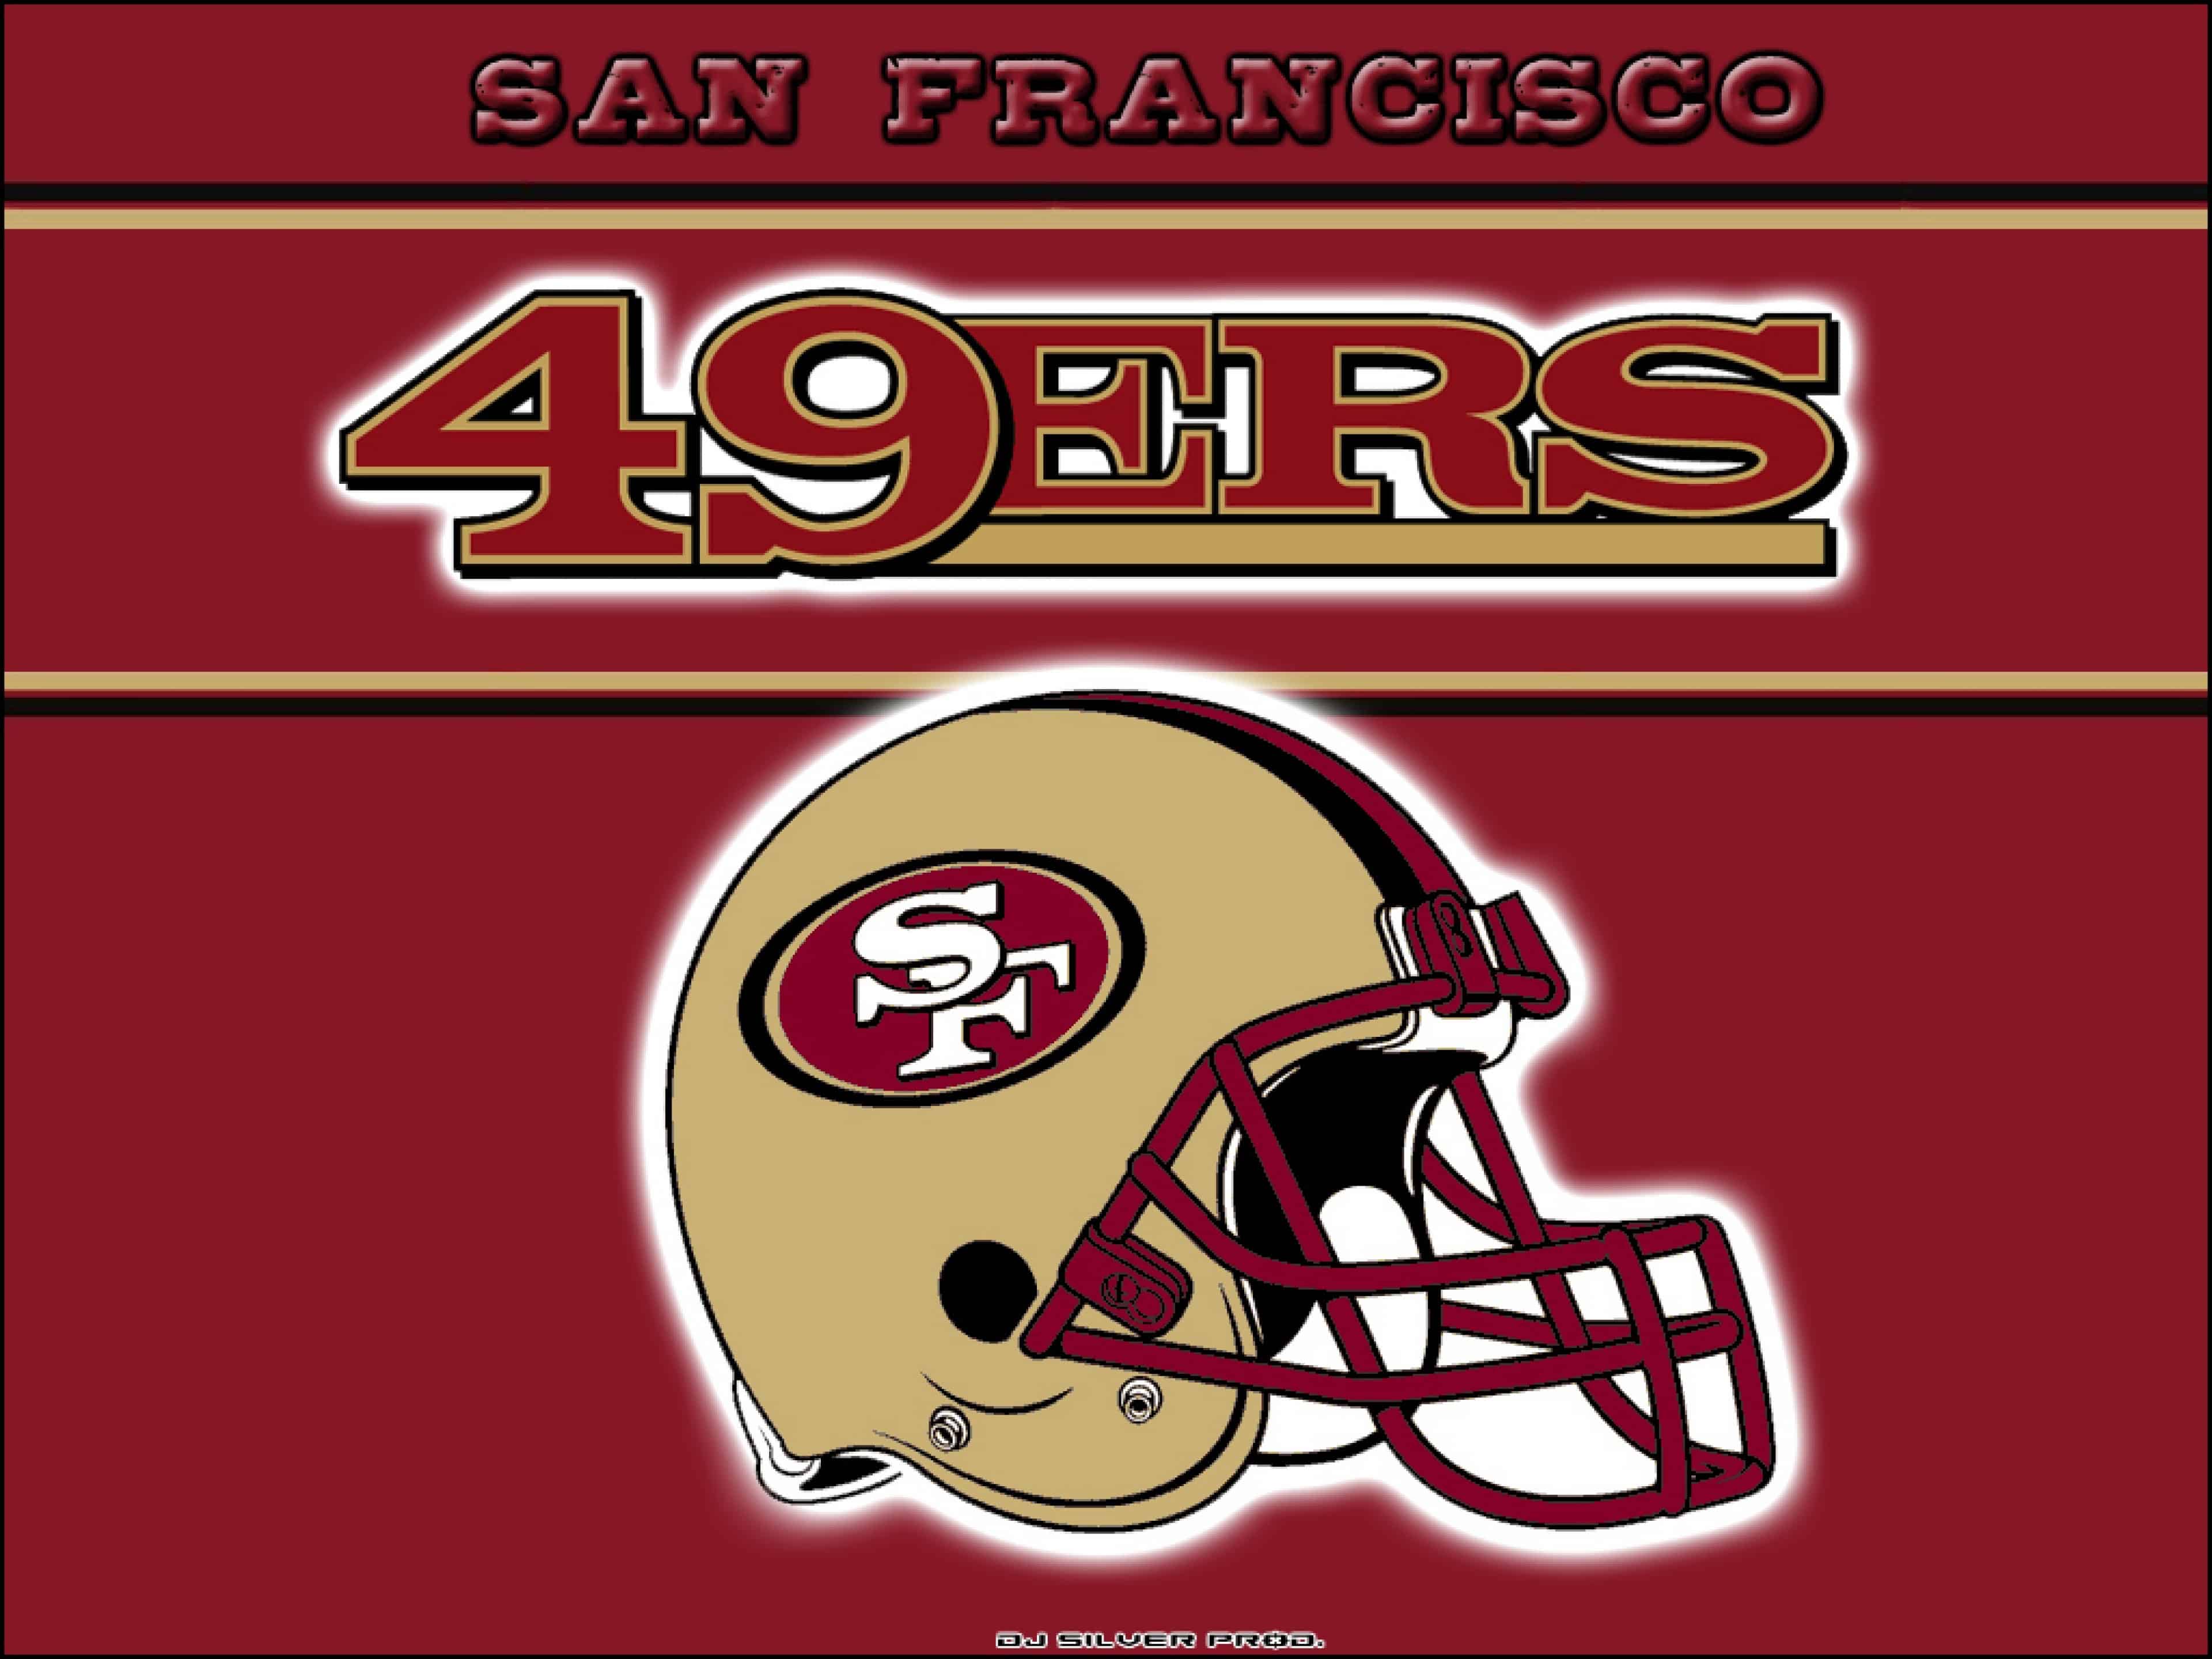 San Francisco 49ers Wallpapers 4k Hd Iphone 7 Plus - Logos And Uniforms Of The San Francisco 49ers , HD Wallpaper & Backgrounds